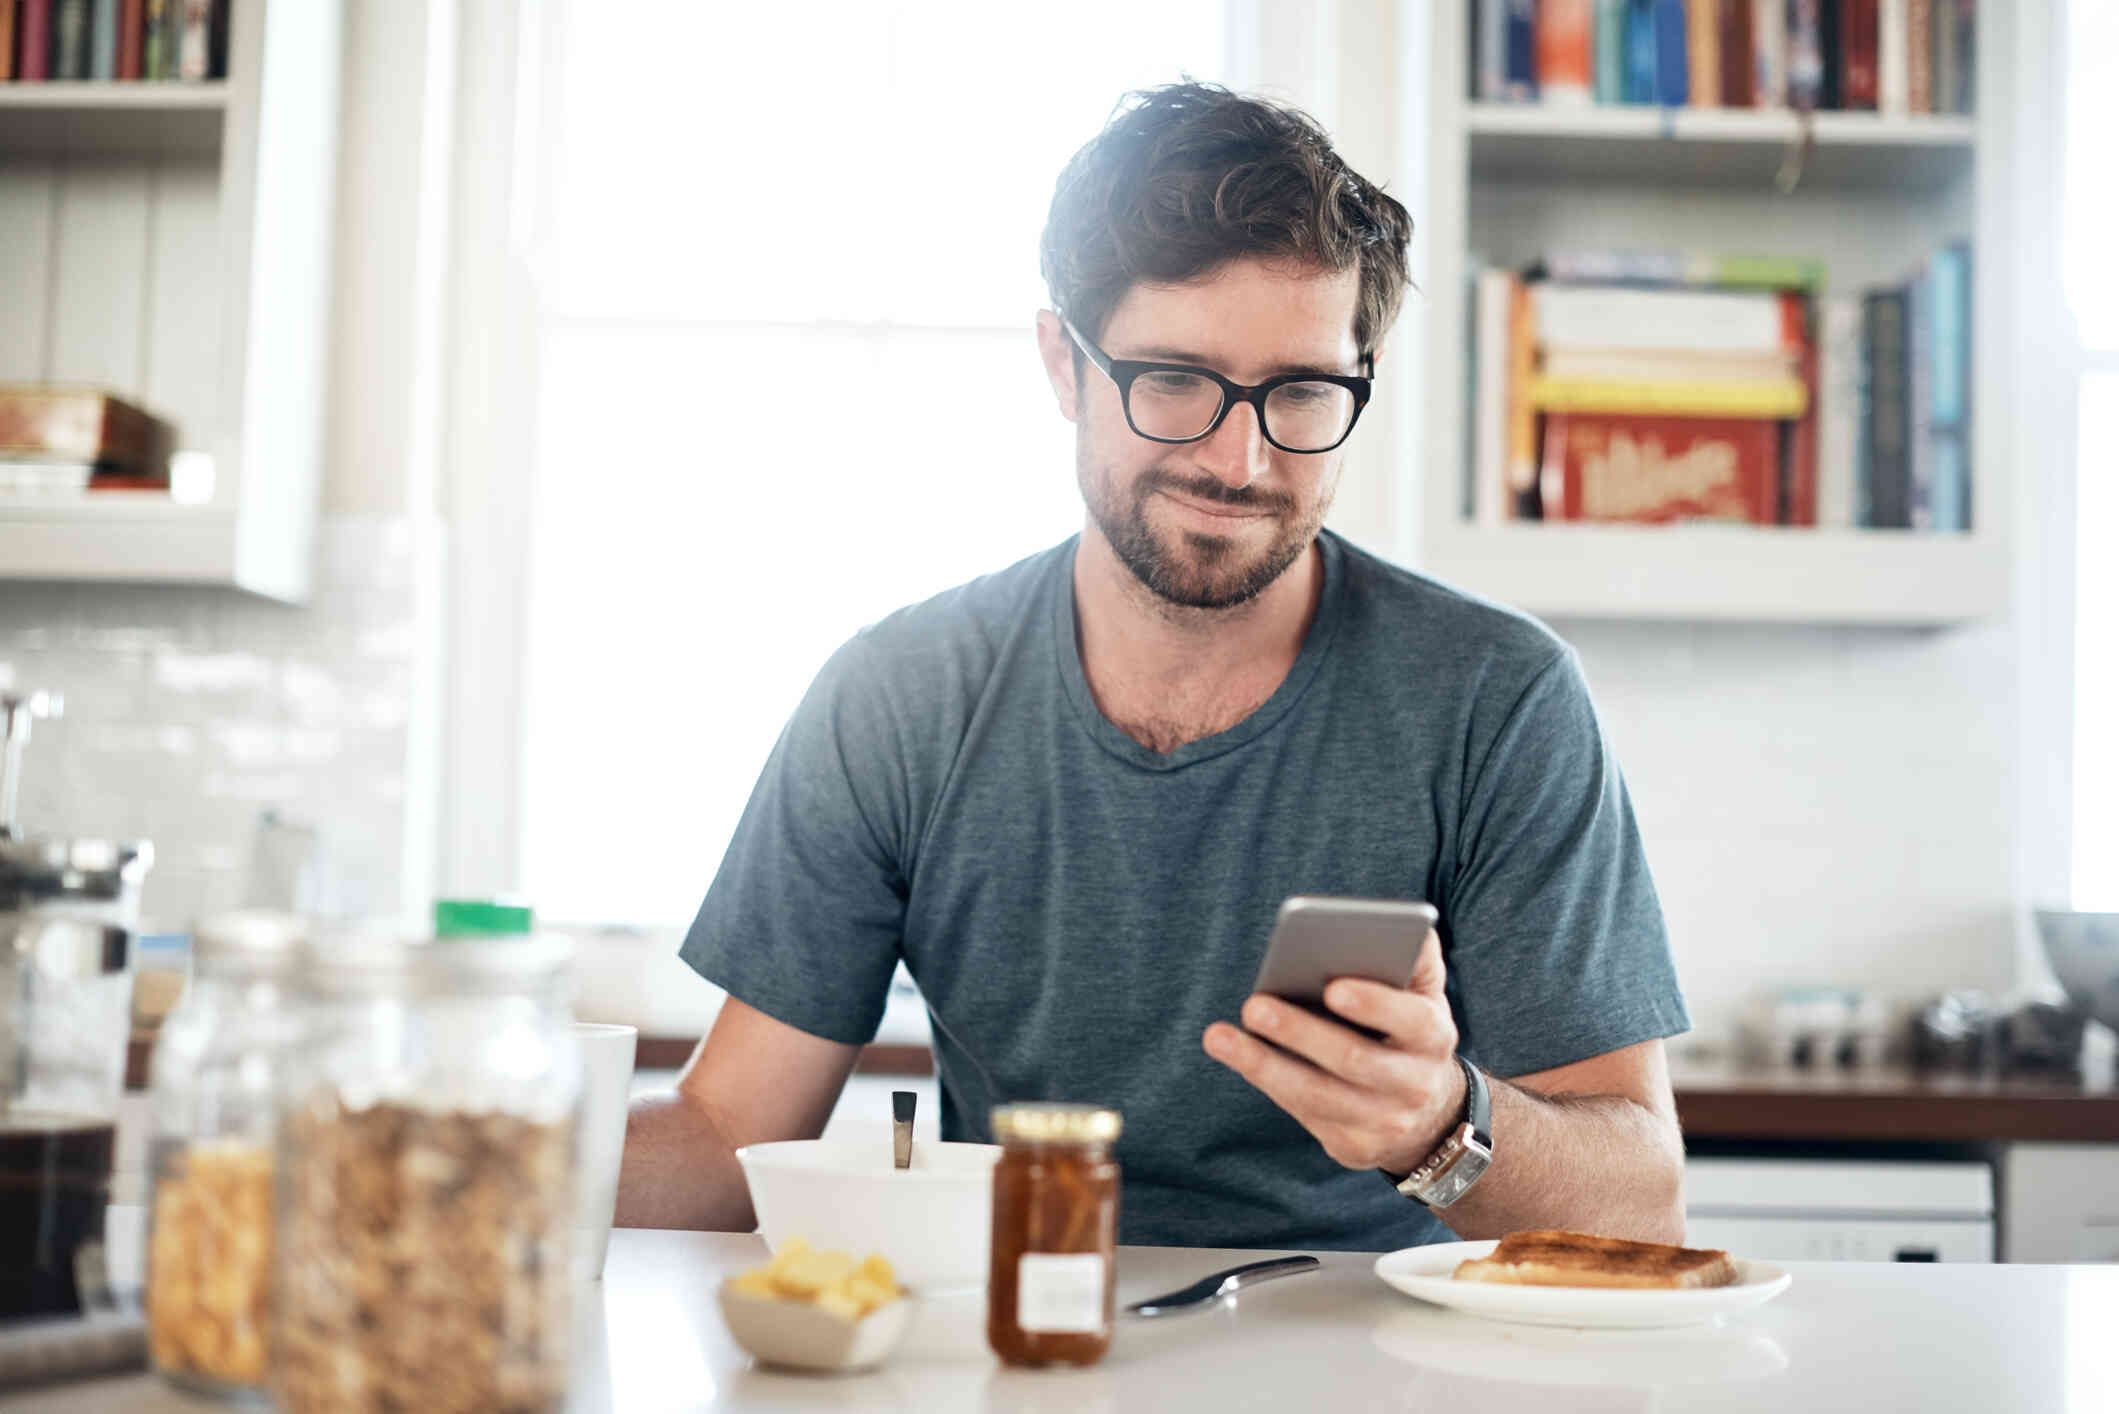 A man with glasses sits at the kitchen table with his breakfast and looks down at the cellphone in his hand with a soft smile.